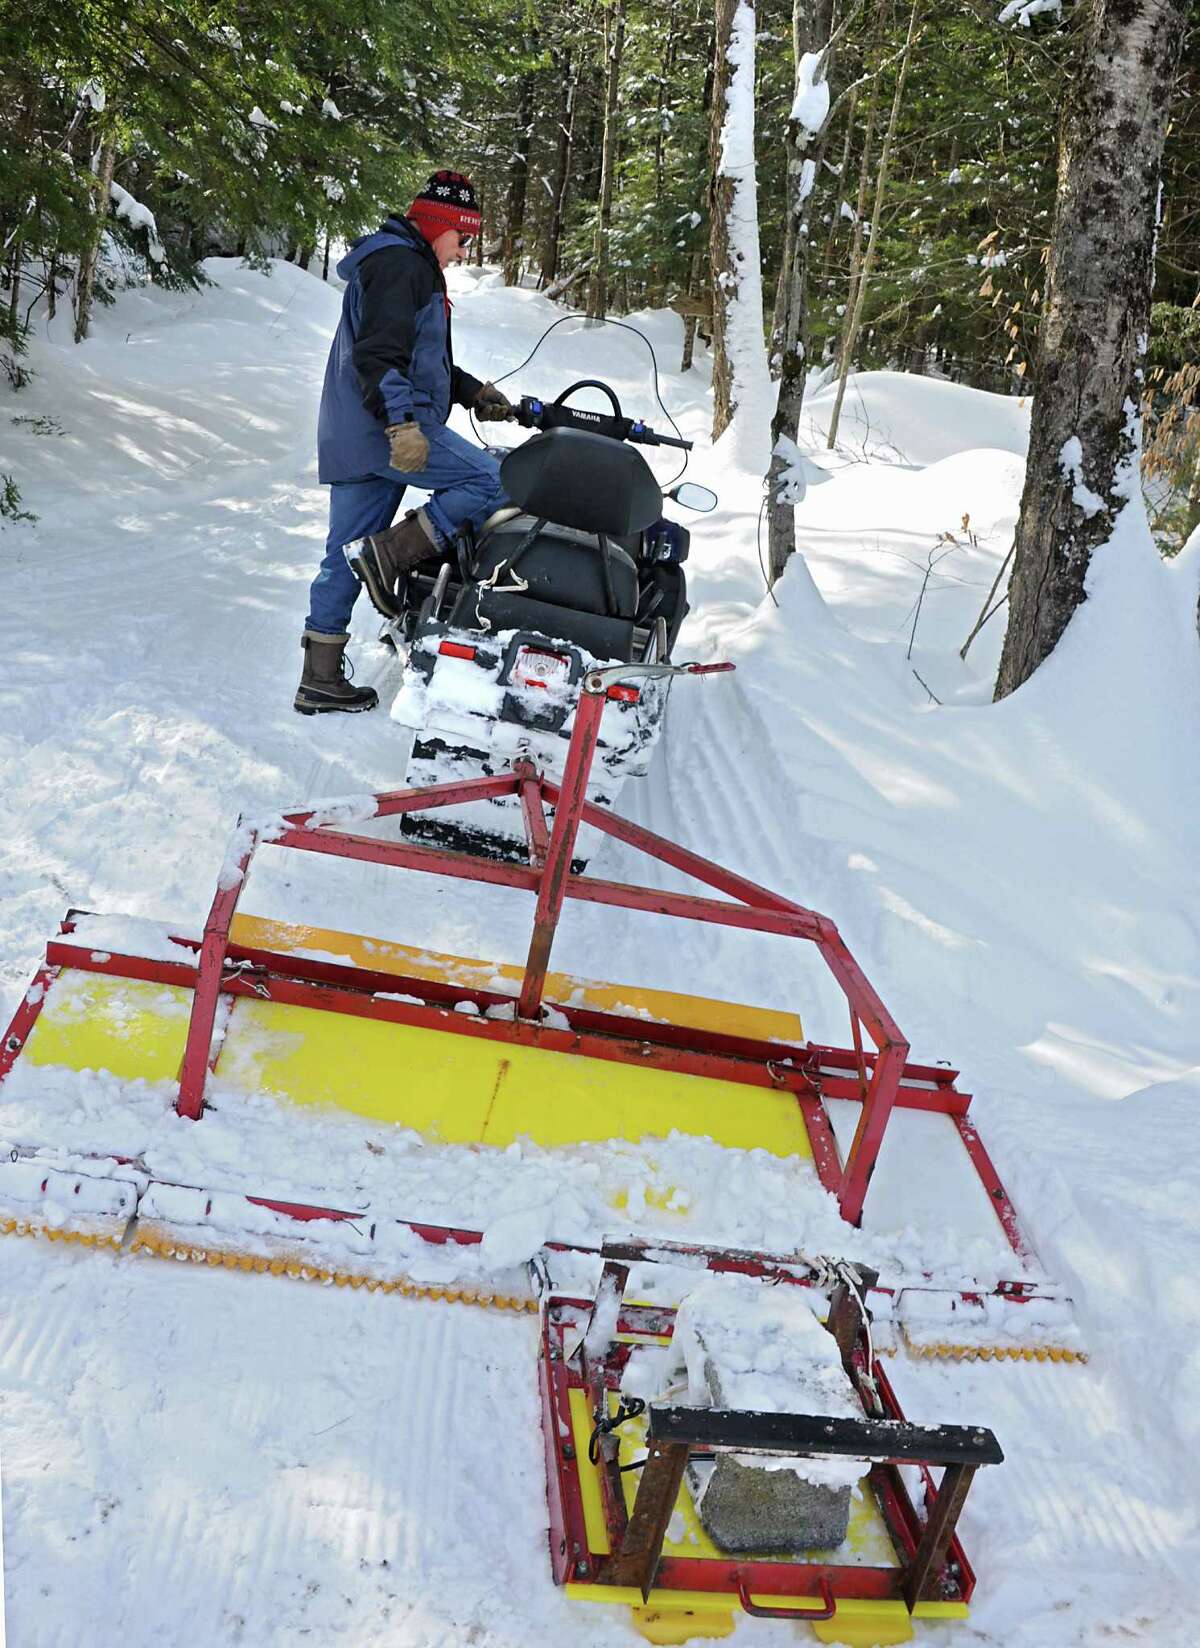 Pine Ridge Cross-Country Ski Area owner Walter Kersch climbs onto his snowmobile while grooming the ski trails on Wednesday, Feb. 11, 2015, at Pine Ridge Cross-Country Ski Area in Poestenkill, N.Y. (Lori Van Buren / Times Union)